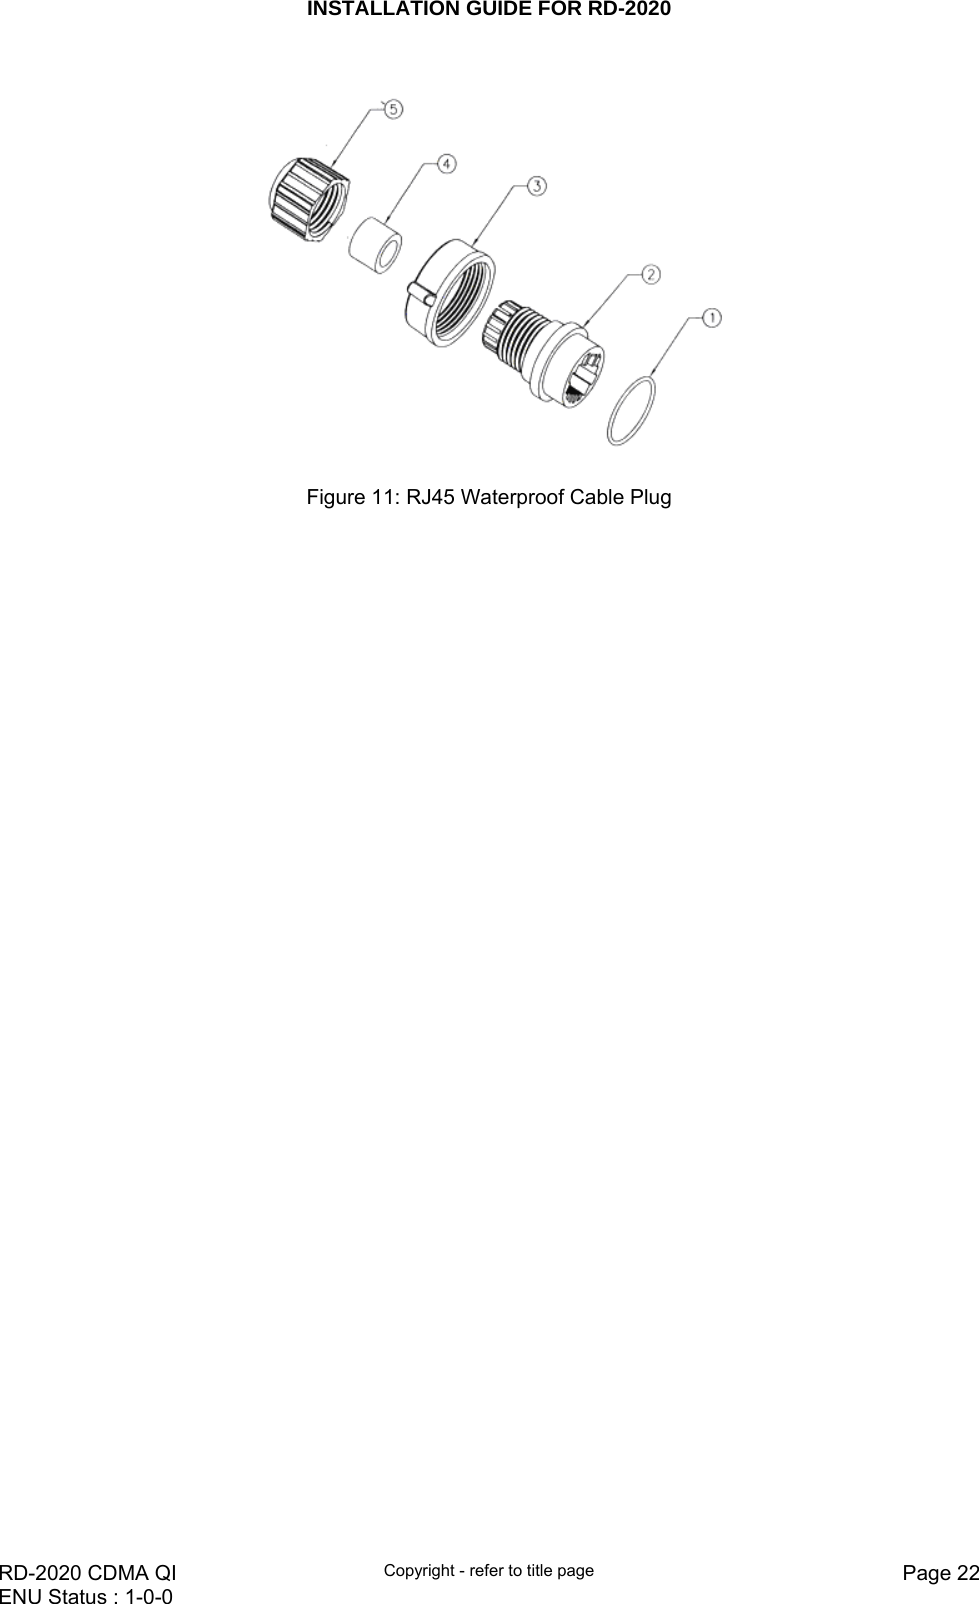 INSTALLATION GUIDE FOR RD-2020    RD-2020 CDMA QI  Copyright - refer to title page  Page 22ENU Status : 1-0-0       Figure 11: RJ45 Waterproof Cable Plug  